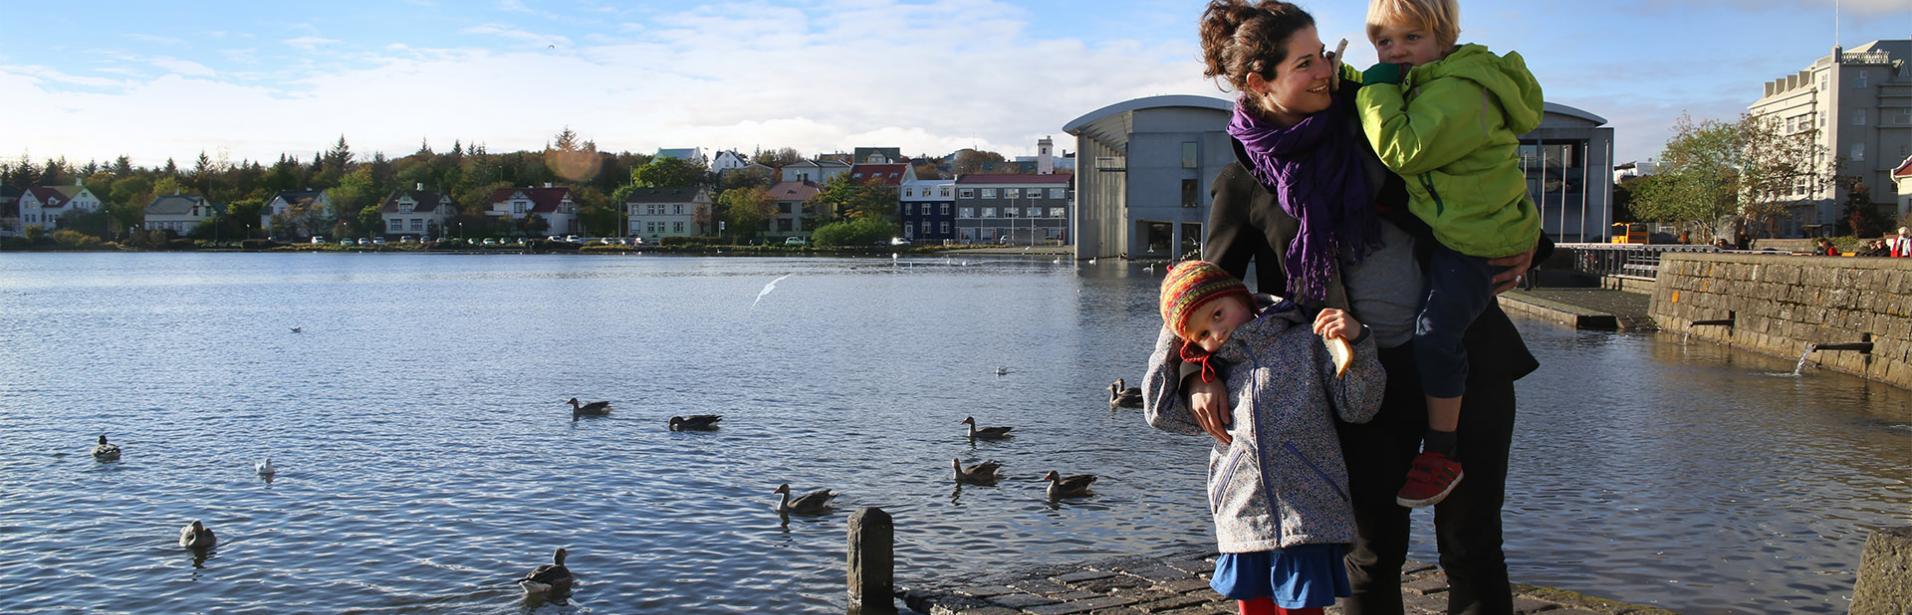 Iceland family holiday with children: woman with two children at the Tjörnin pond, Reykjavik center.